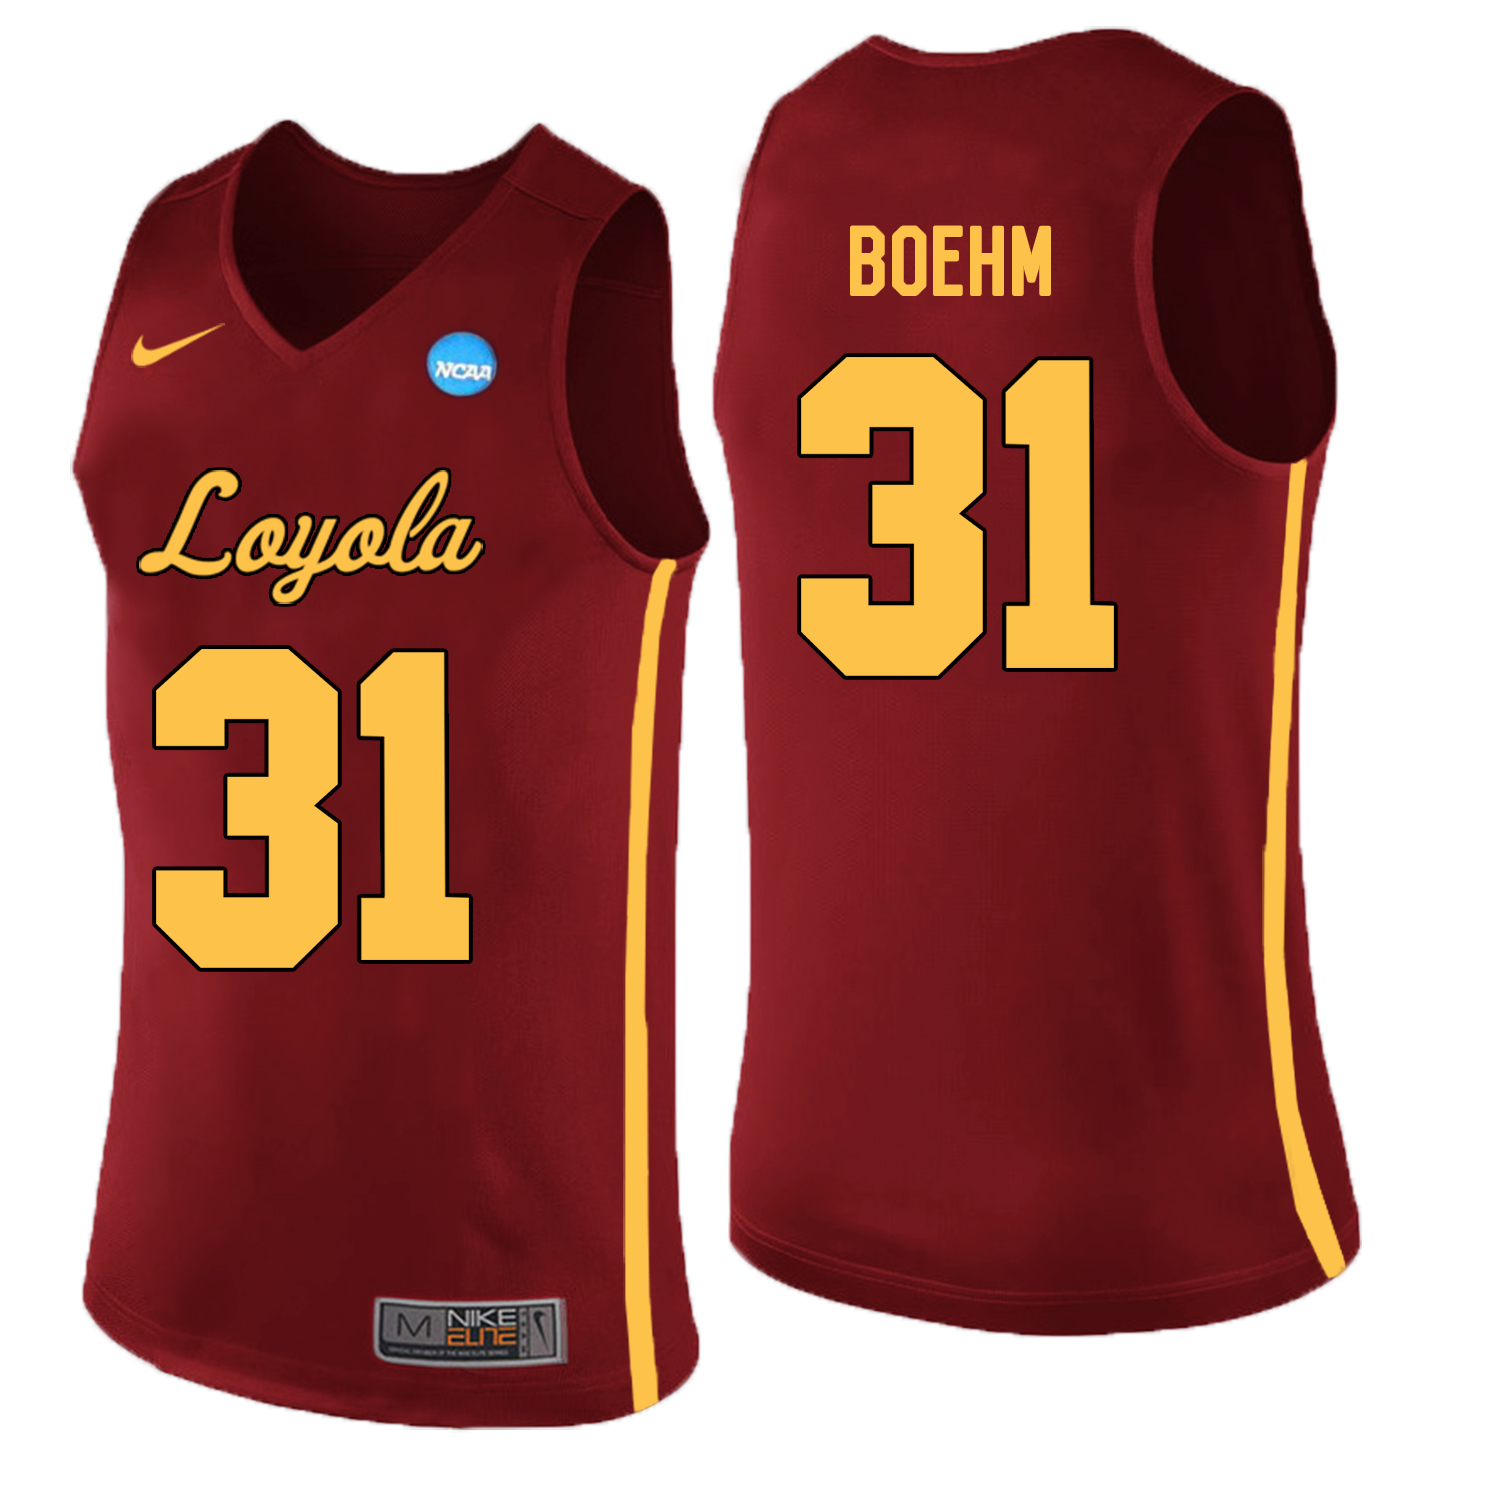 Loyola (Chi) Ramblers 31 Dylan Boehm Red College Basketball Jersey